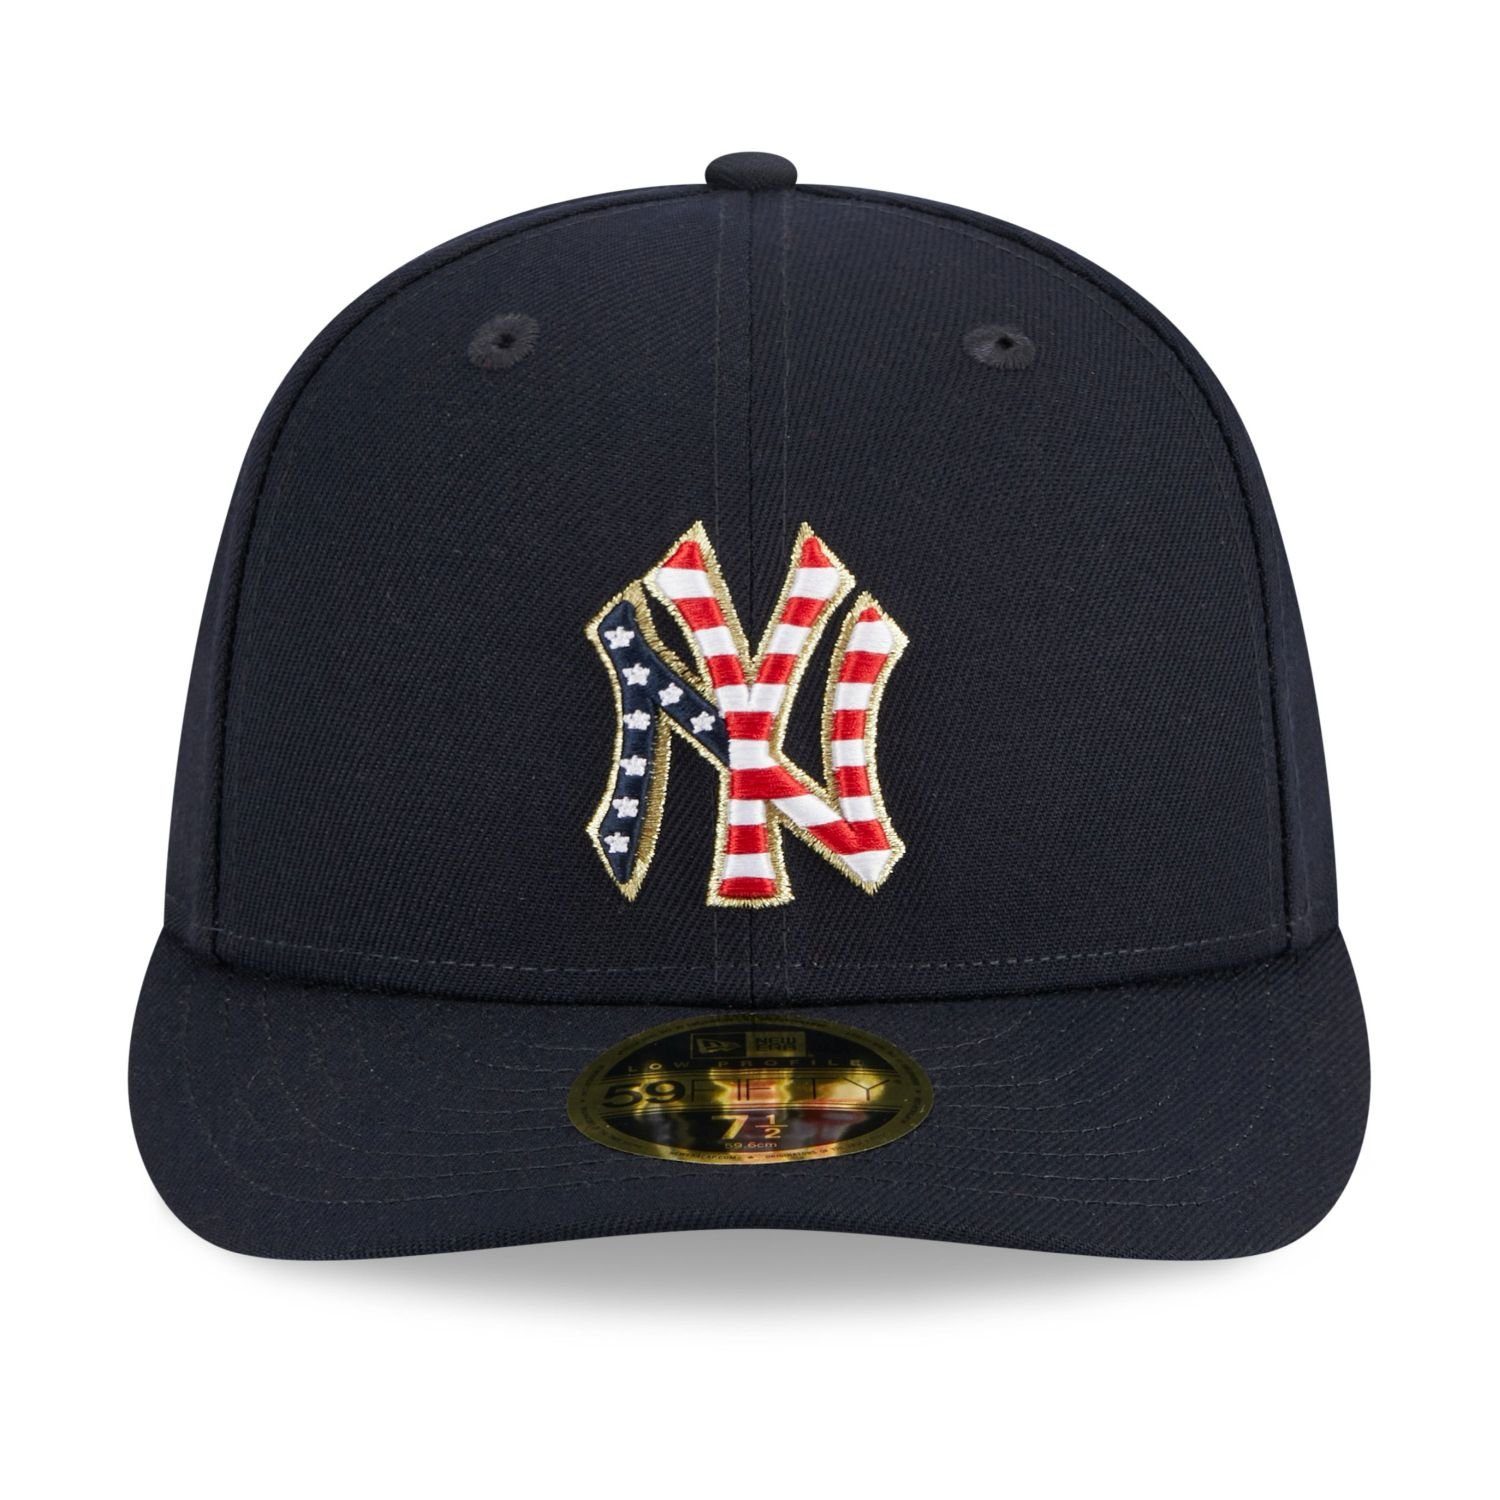 4TH York Fitted JULY Profile Era New Yankees New 59Fifty Low Cap